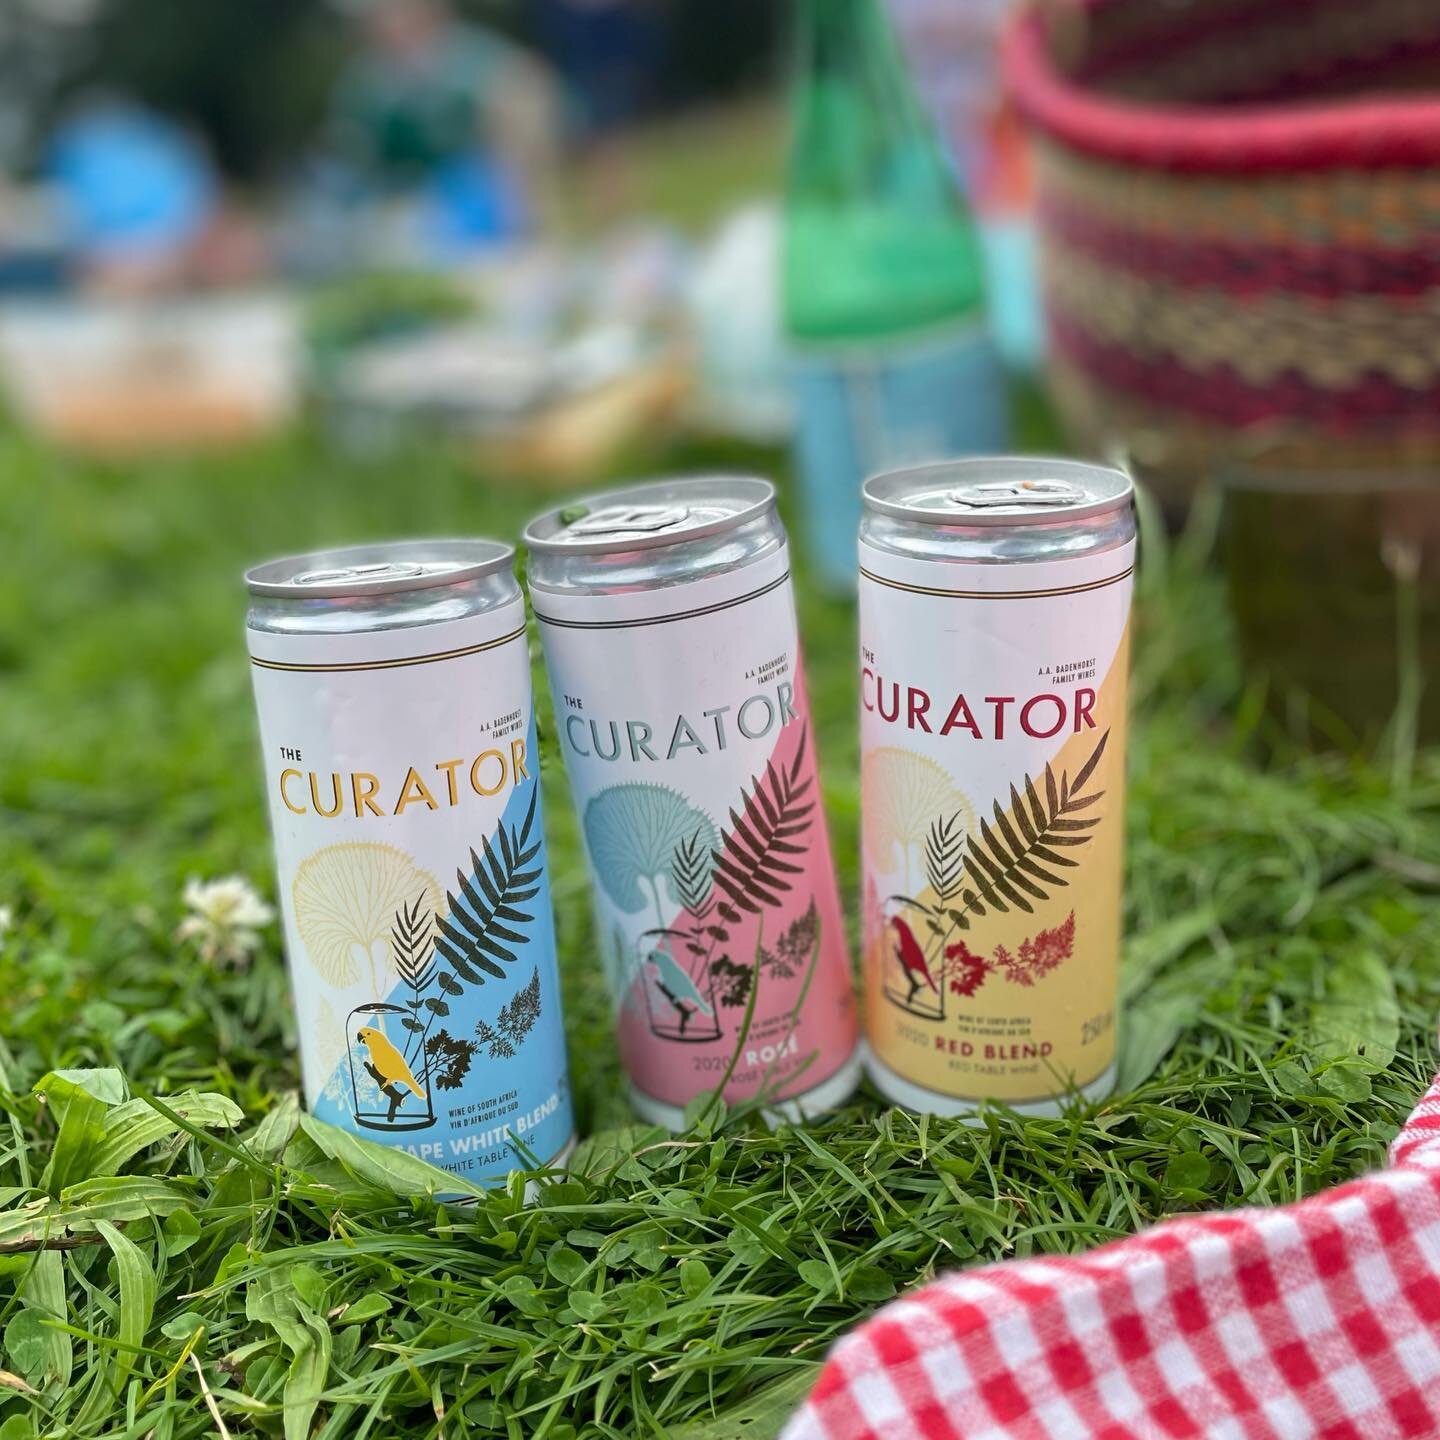 You can now get decent wine in a can at @vindinista! Handbag-friendly, great for picnics, camping, festivals - and the beach; The Curator cans from @AABadenhorst in South Africa come in a white, red and a ros&eacute;.

Ros&eacute; - pale and dry, mad